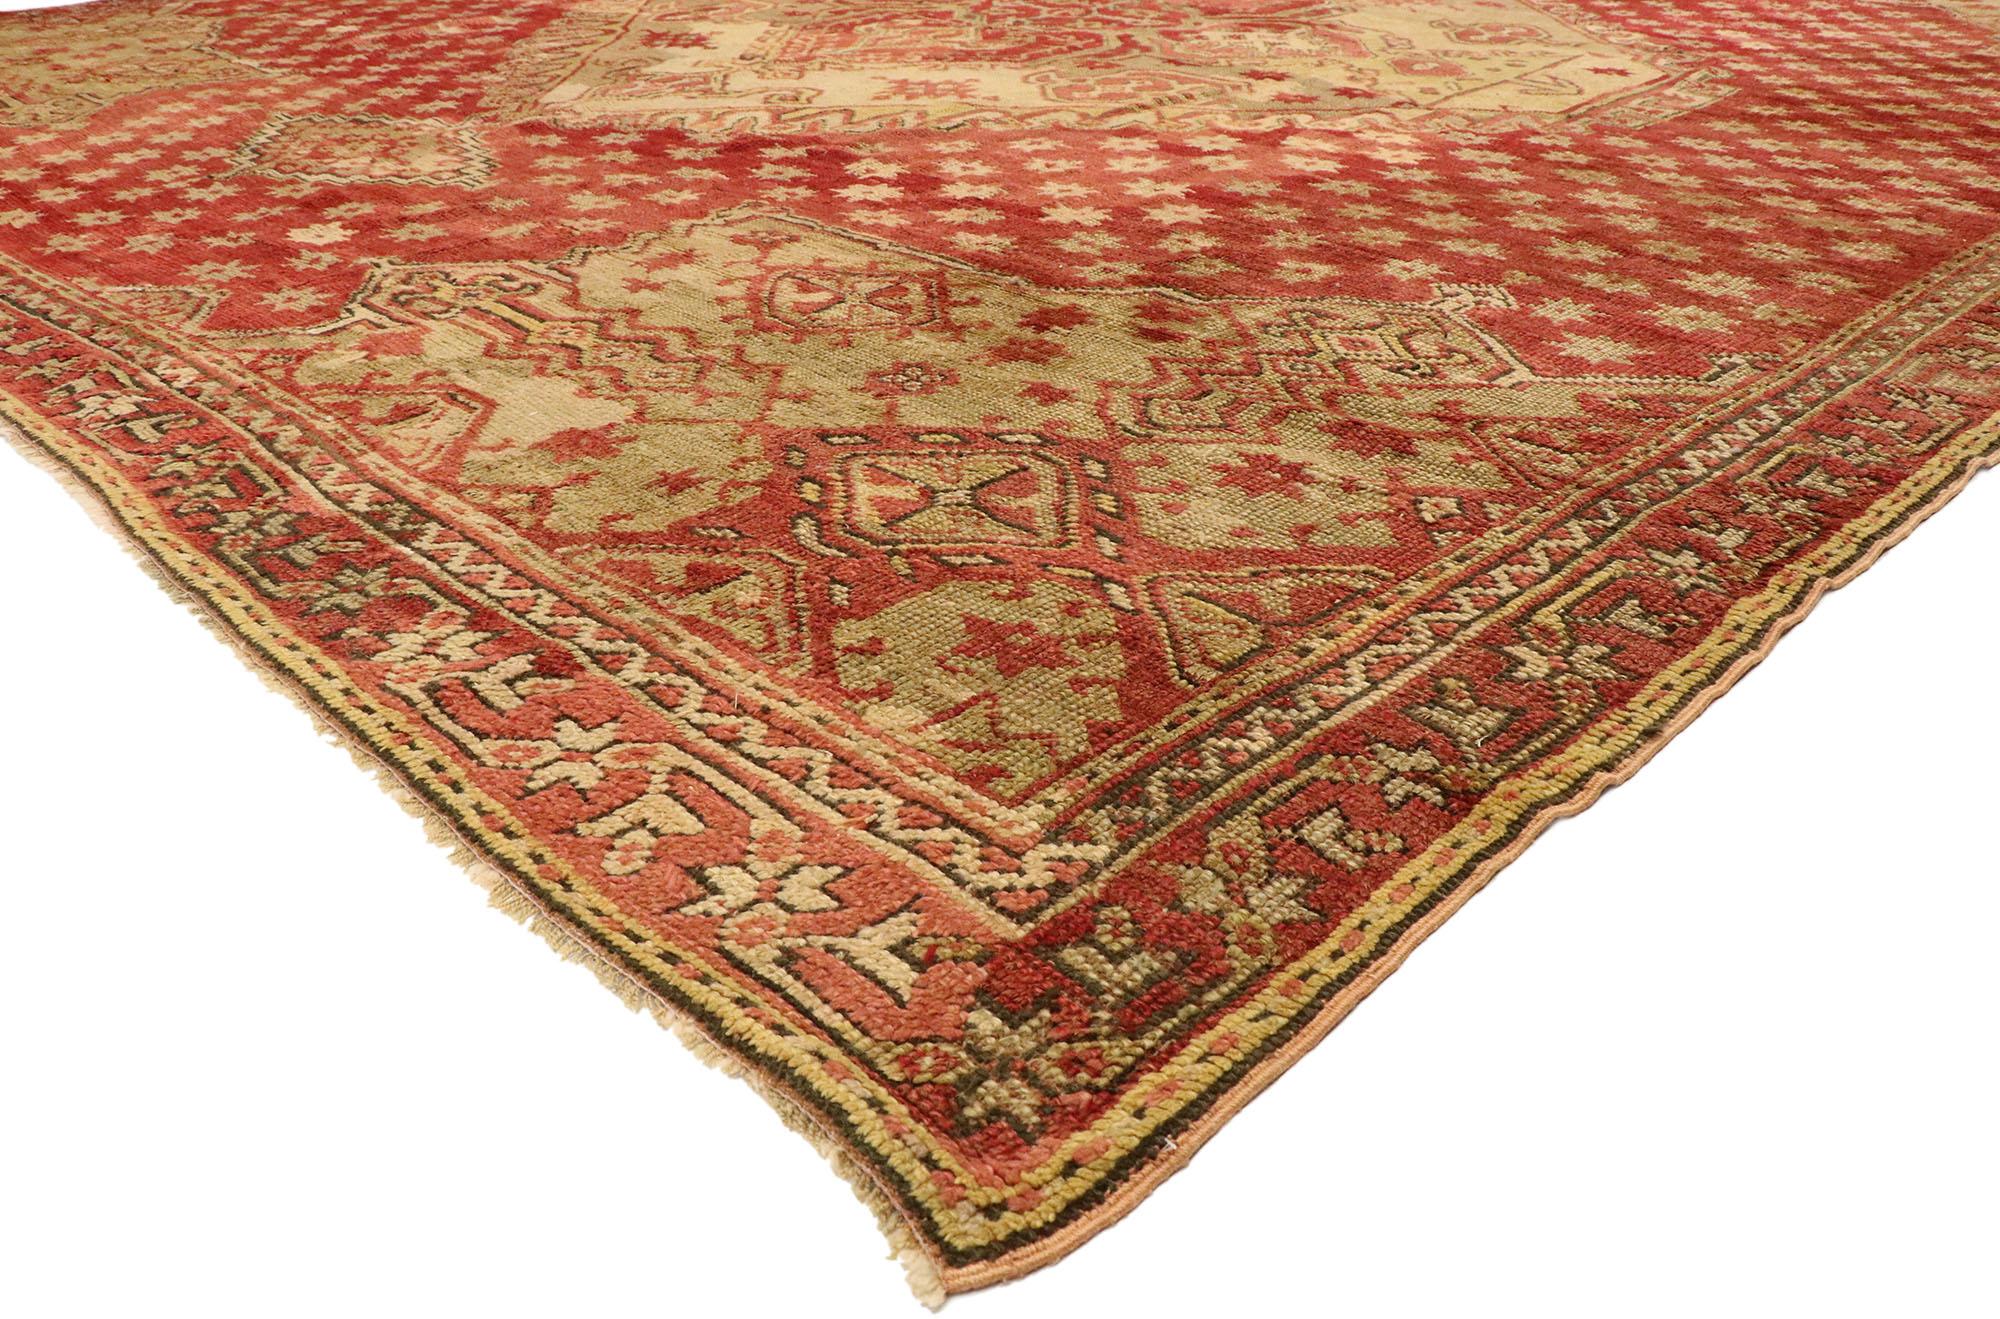 77477 Antique Turkish Oushak Rug, 14'00 x 16'03.
Step into a world where regal elegance meets the captivating allure of Wabi-Sabi in this hand knotted wool antique Turkish Oushak. Behold this magnificent antique Oushak rug, a true masterpiece that